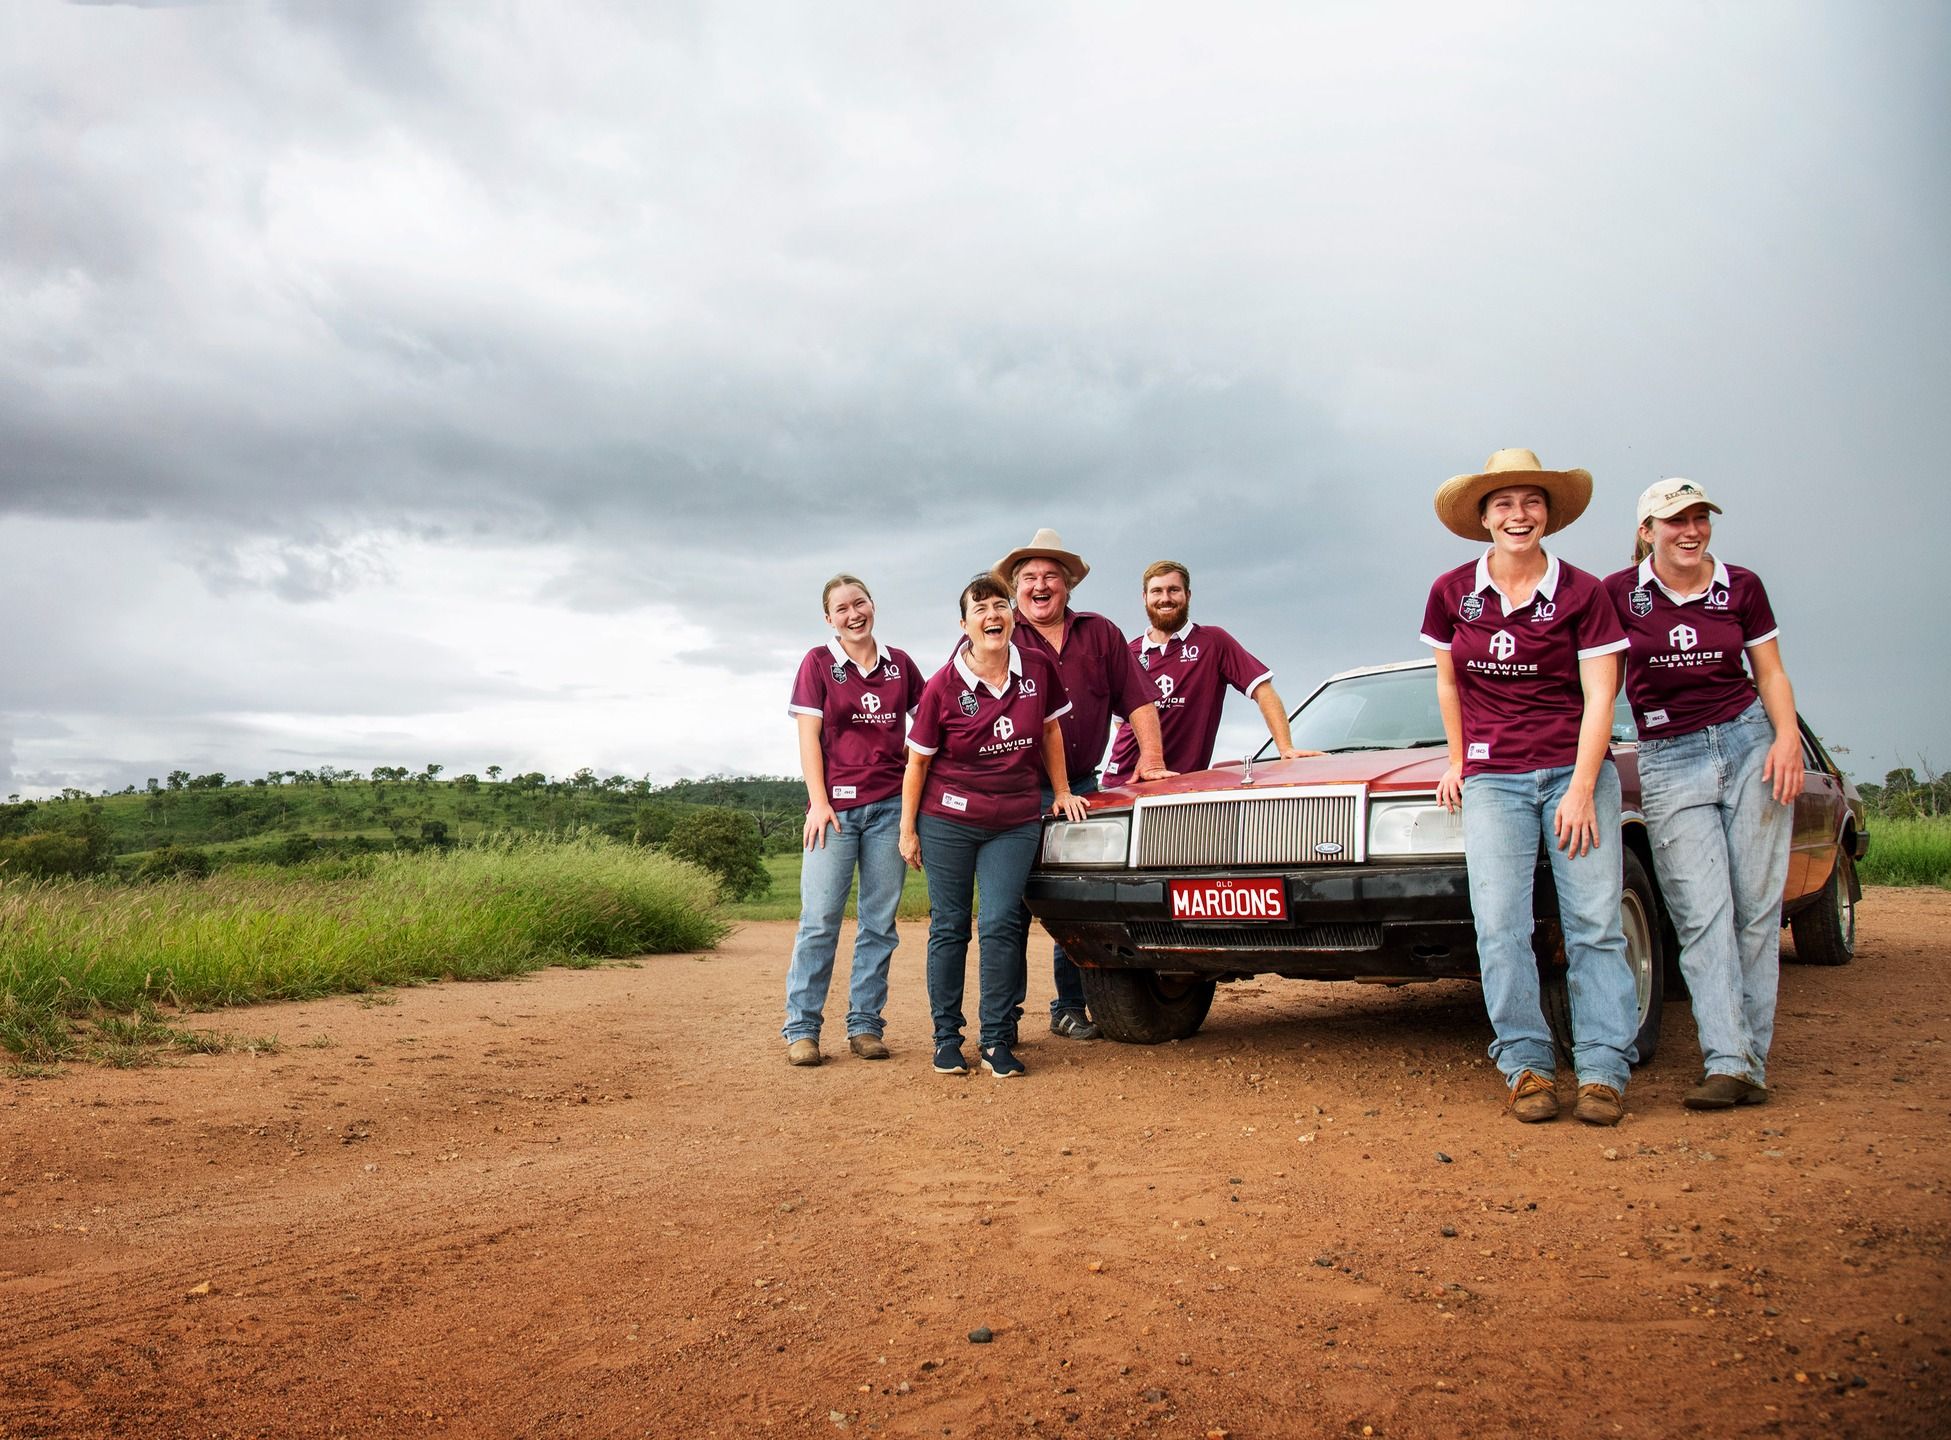 A group of smiling people in maroon shirts stand around a car on a dirt road.